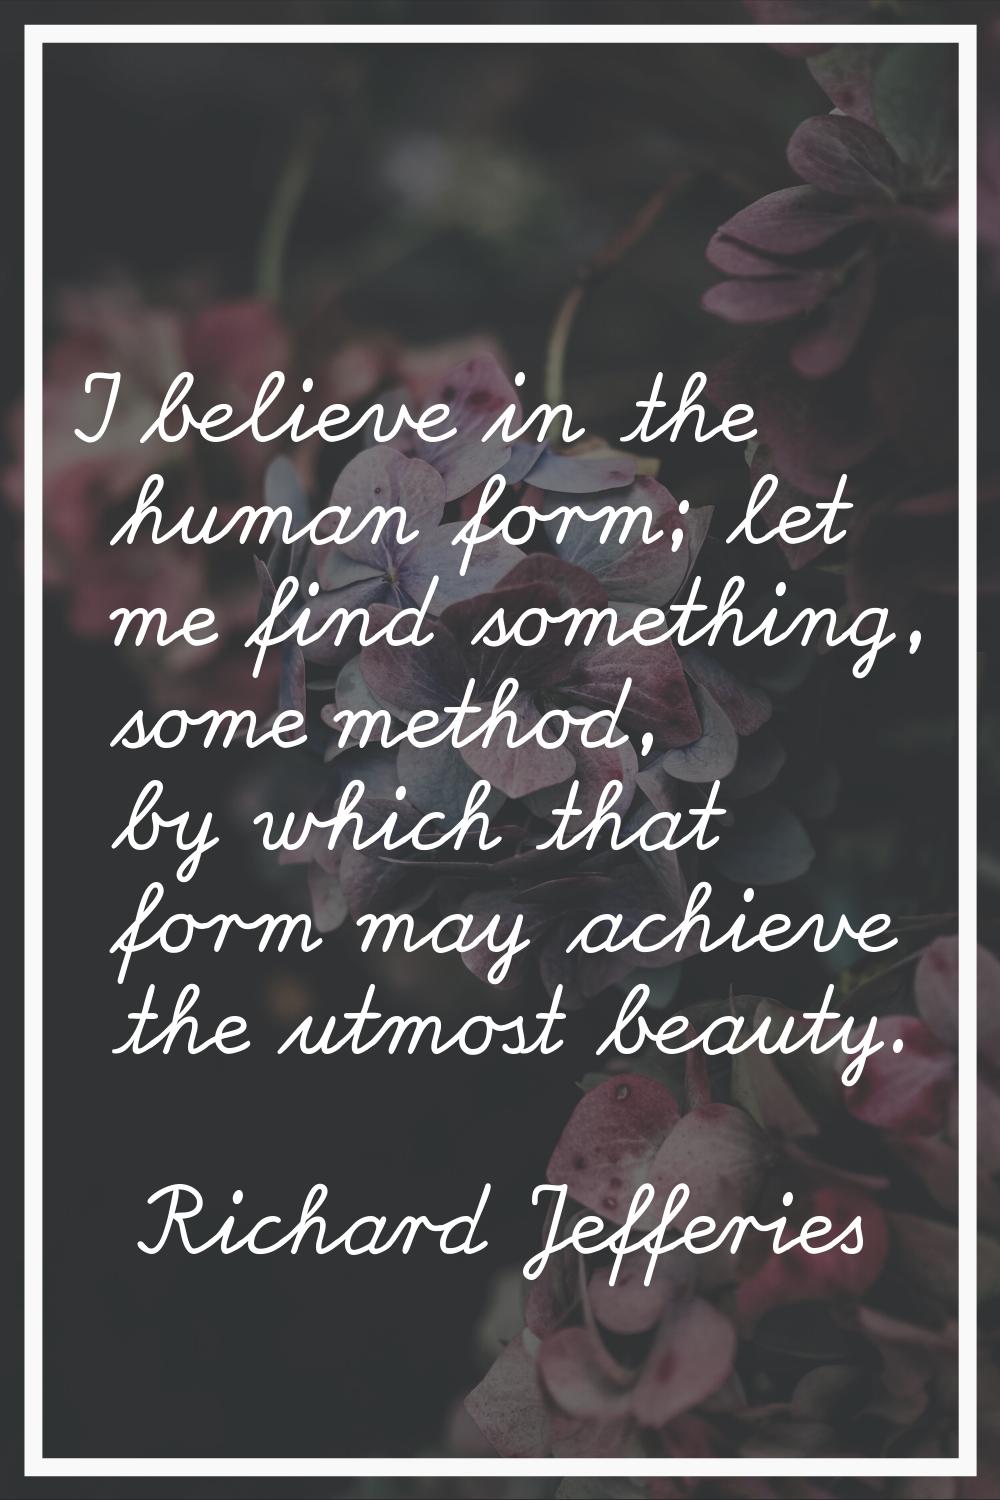 I believe in the human form; let me find something, some method, by which that form may achieve the